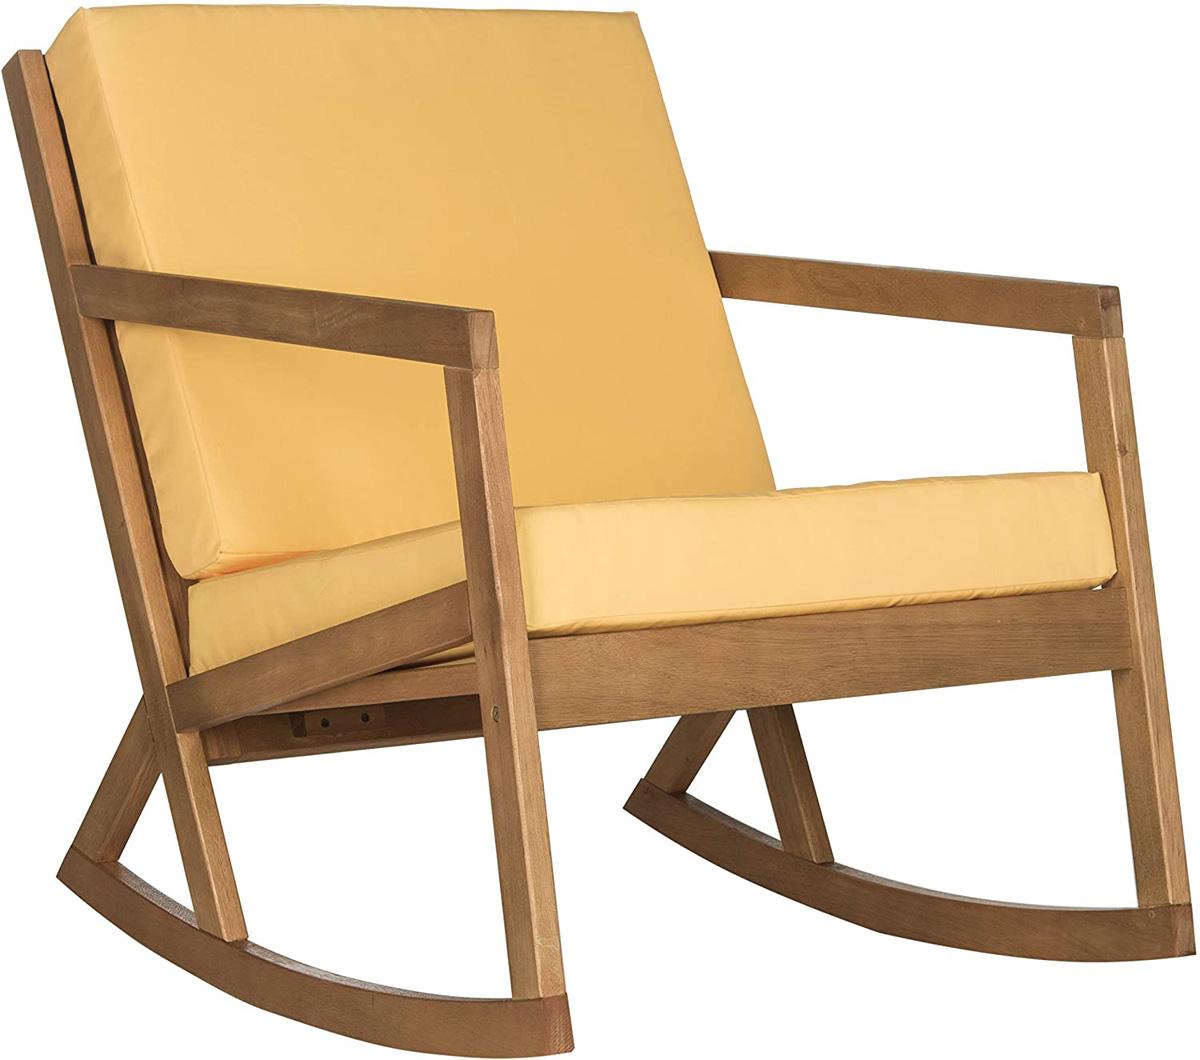 Safavieh Vernon Indoor Outdoor Modern Rocking Chair for $154.01 Shipped